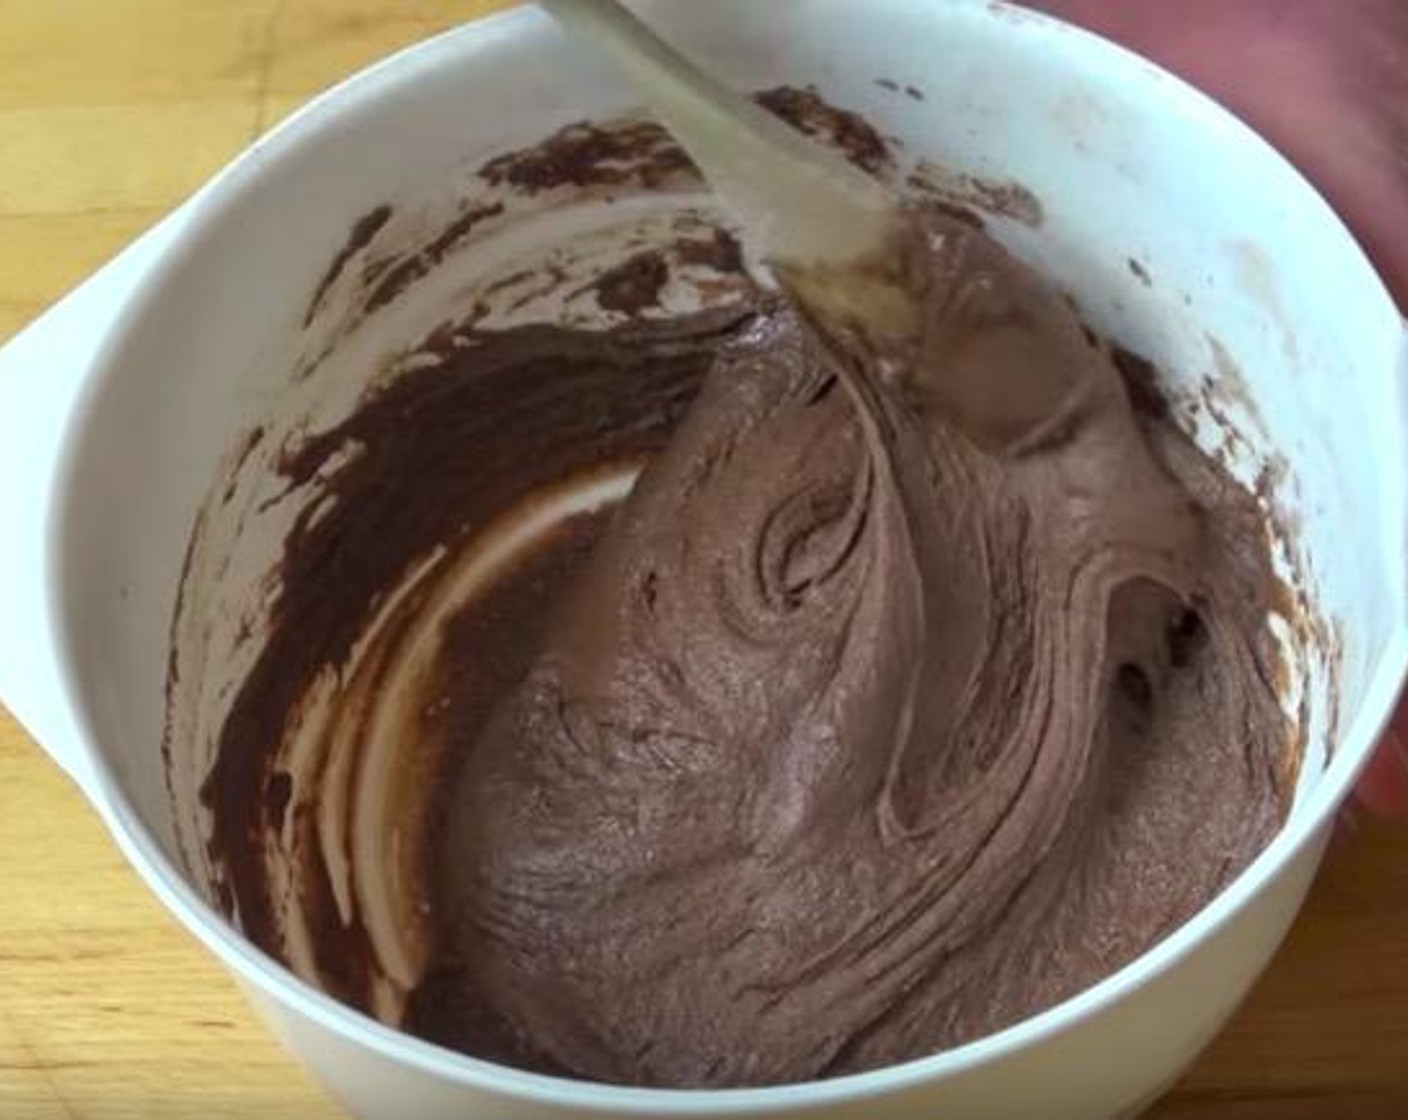 step 1 Put All-Purpose Flour (1 cup), Caster Sugar (1/3 cup), Baking Powder (1 tsp), Unsweetened Cocoa Powder (2 Tbsp) into a mixing bowl and mix it together. Make a well in the center and add Milk (1/4 cup), Butter (3 Tbsp), Egg (1) mix together until smooth.